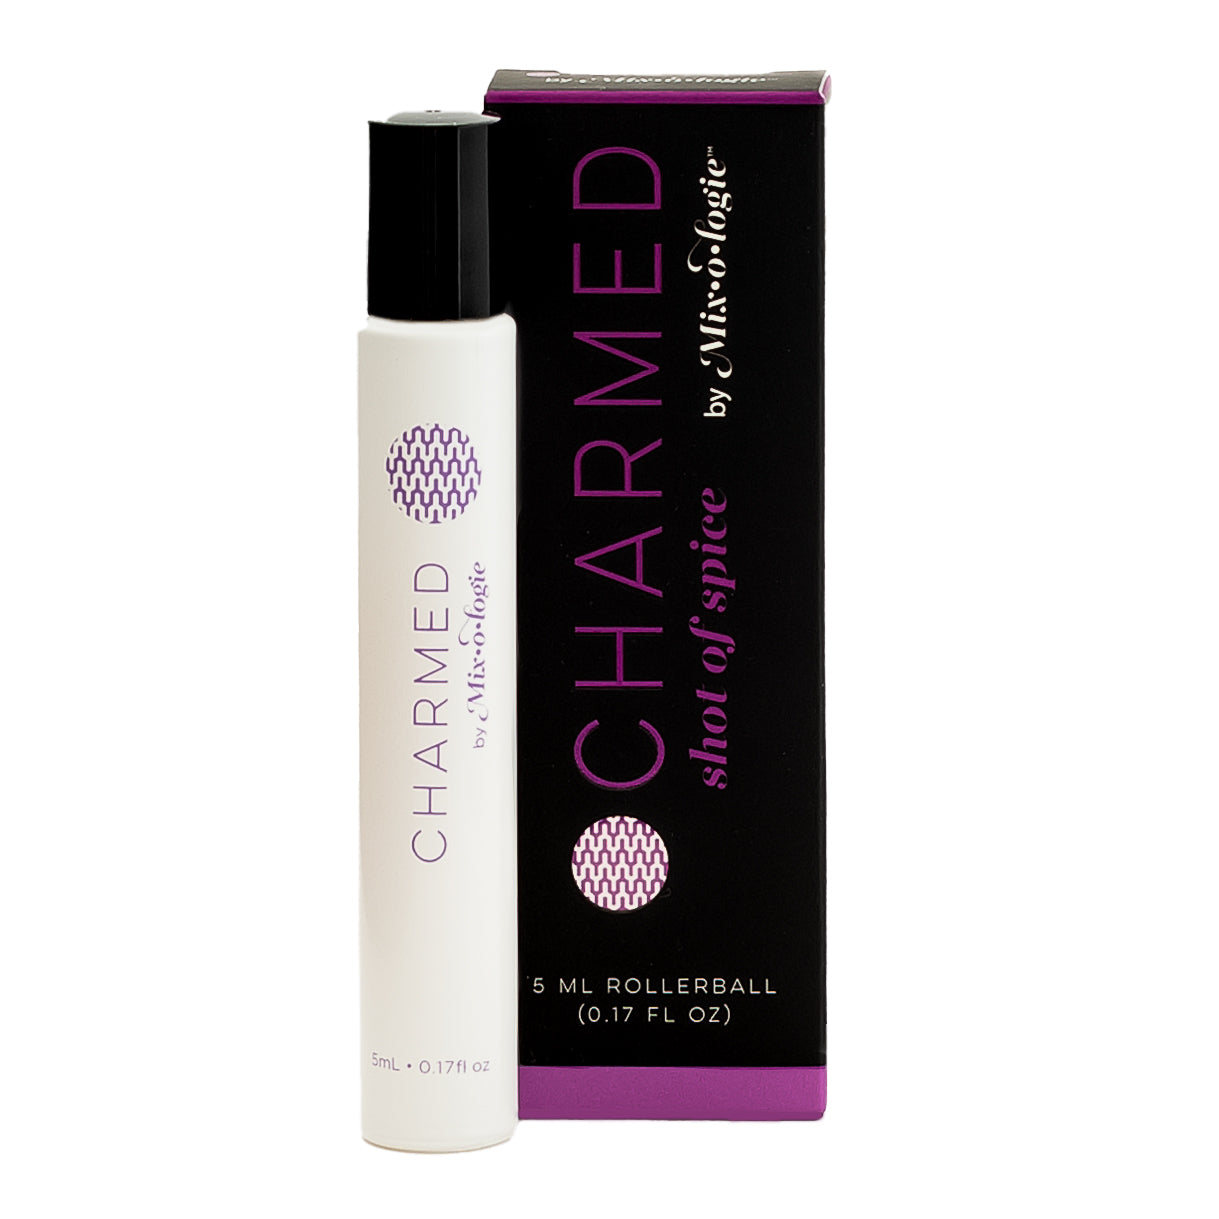 Charmed (shot of spice) - Perfume Oil Rollerball (5 mL)